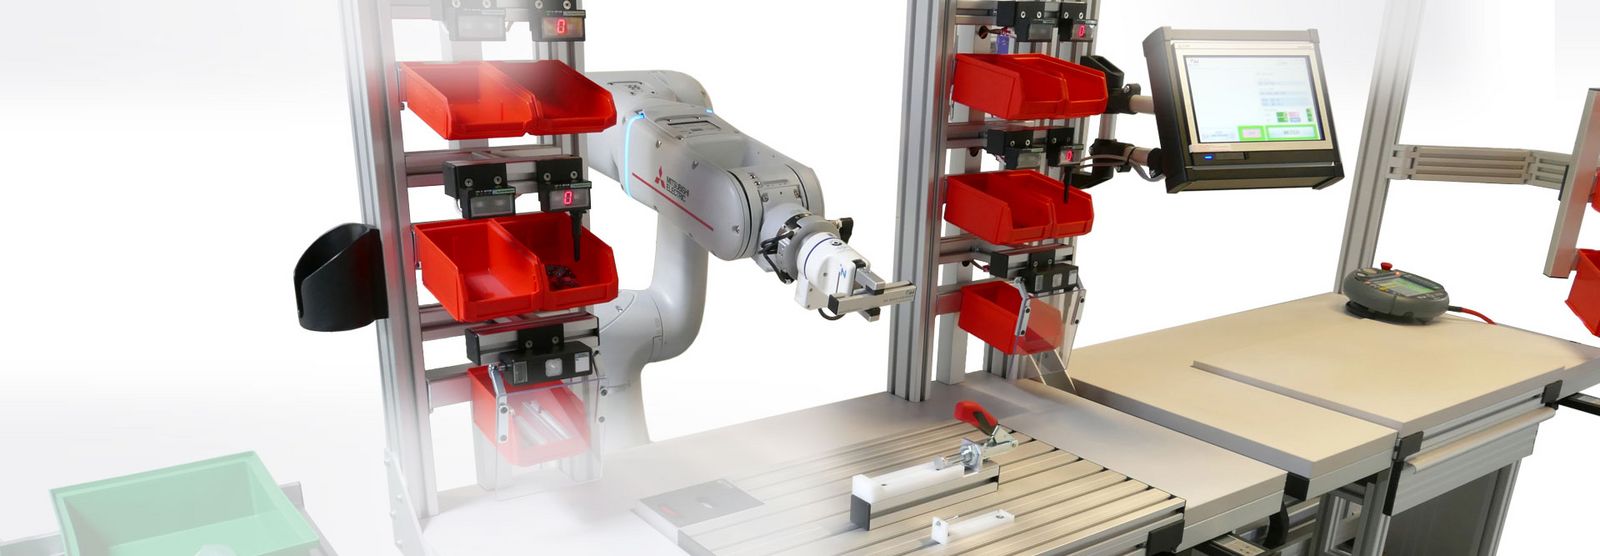 Cobots to provide support for modern workstation systems